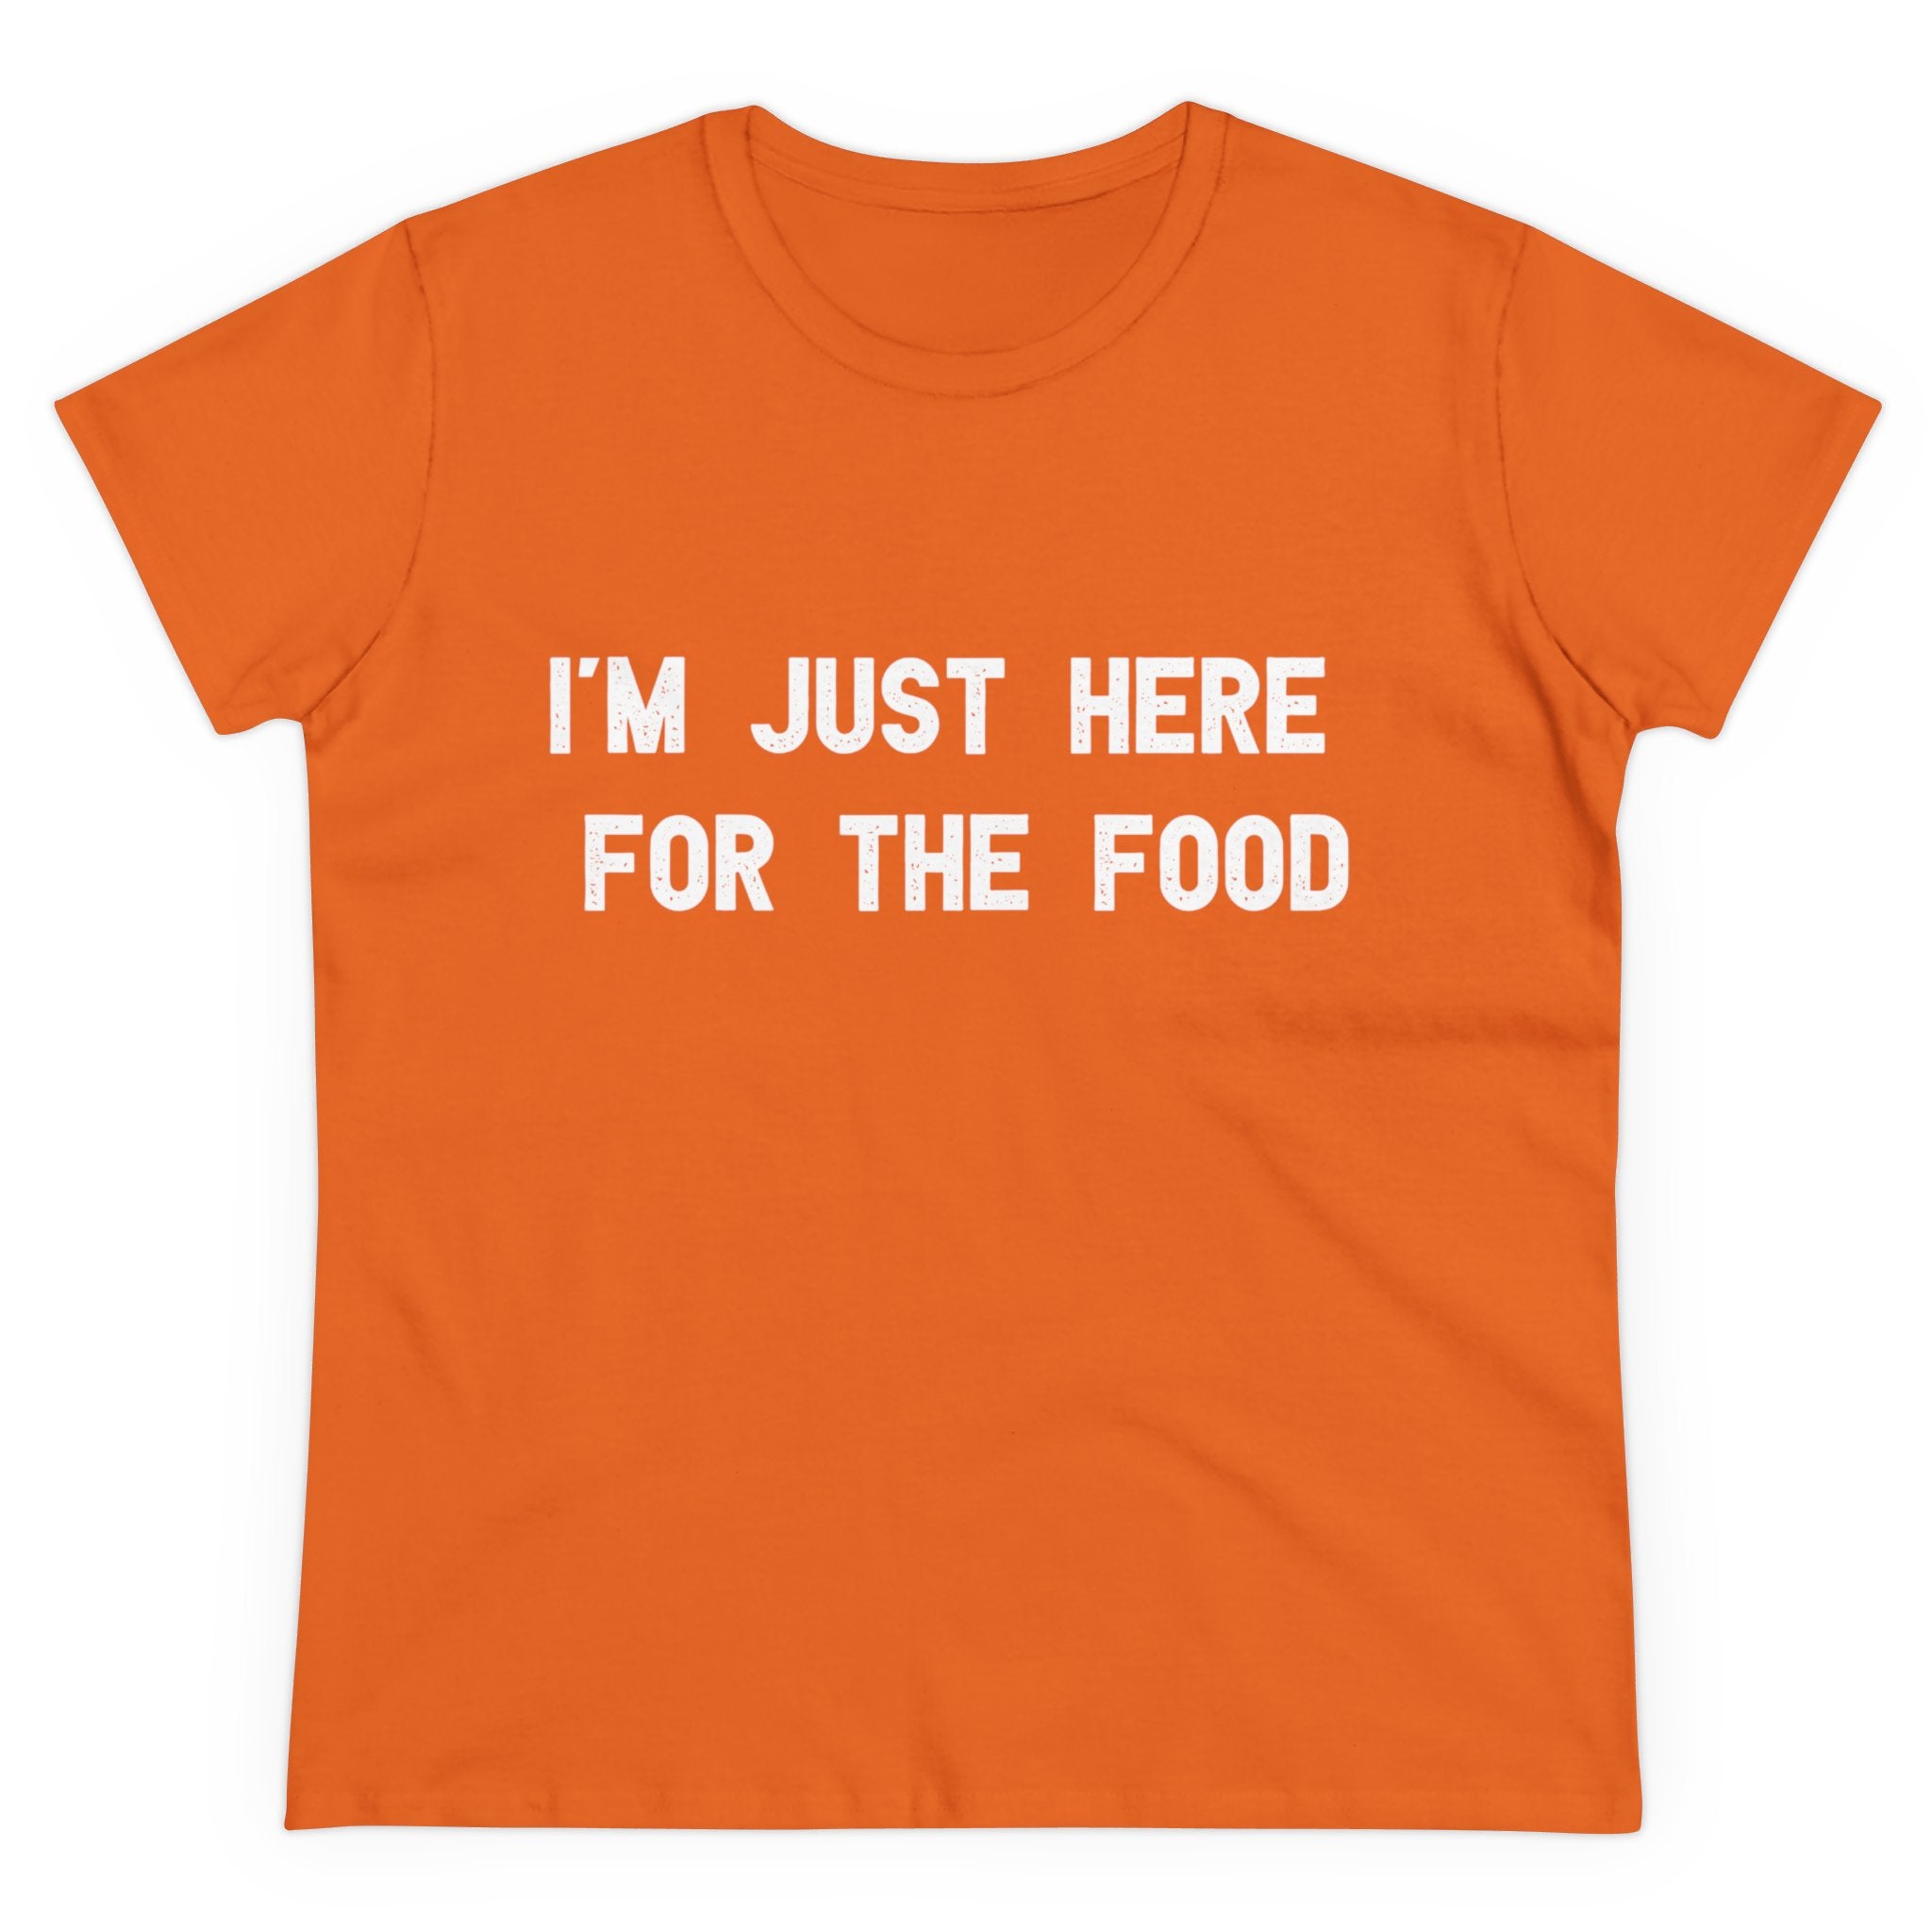 I'm Just Here For The Food - Women's Tee